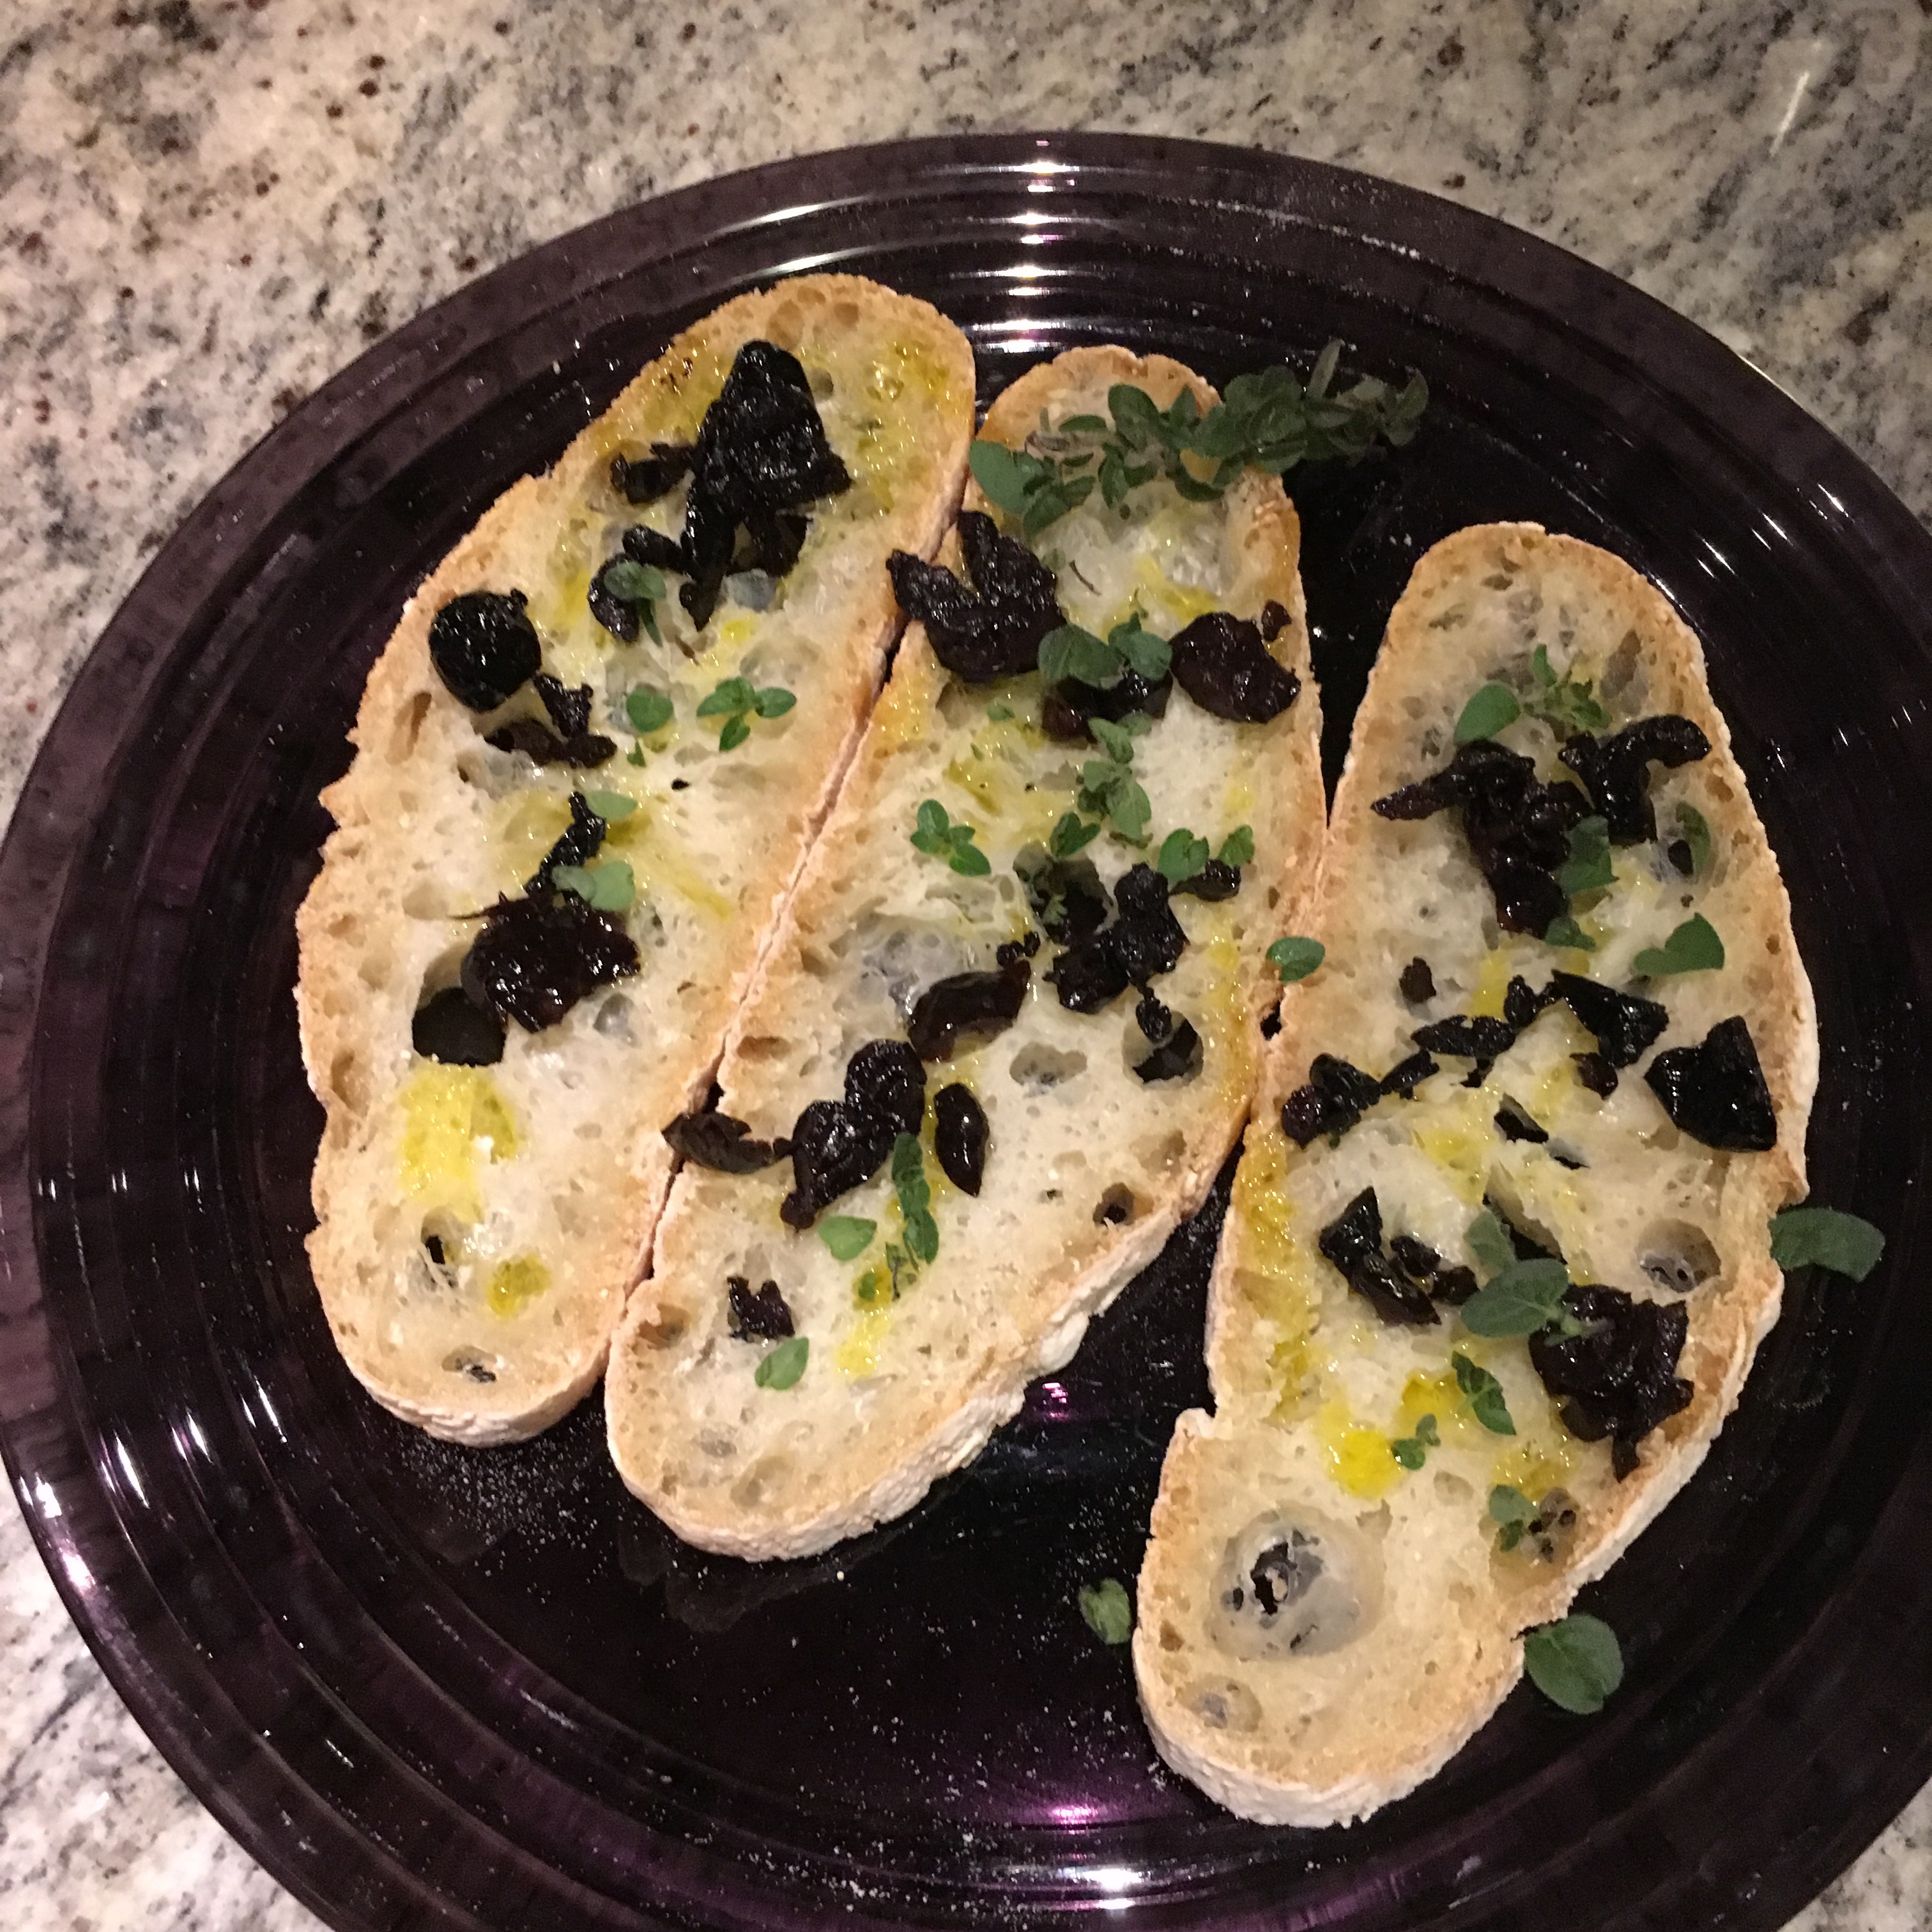 Food, family, memories (a recipe for pan-fried olives)